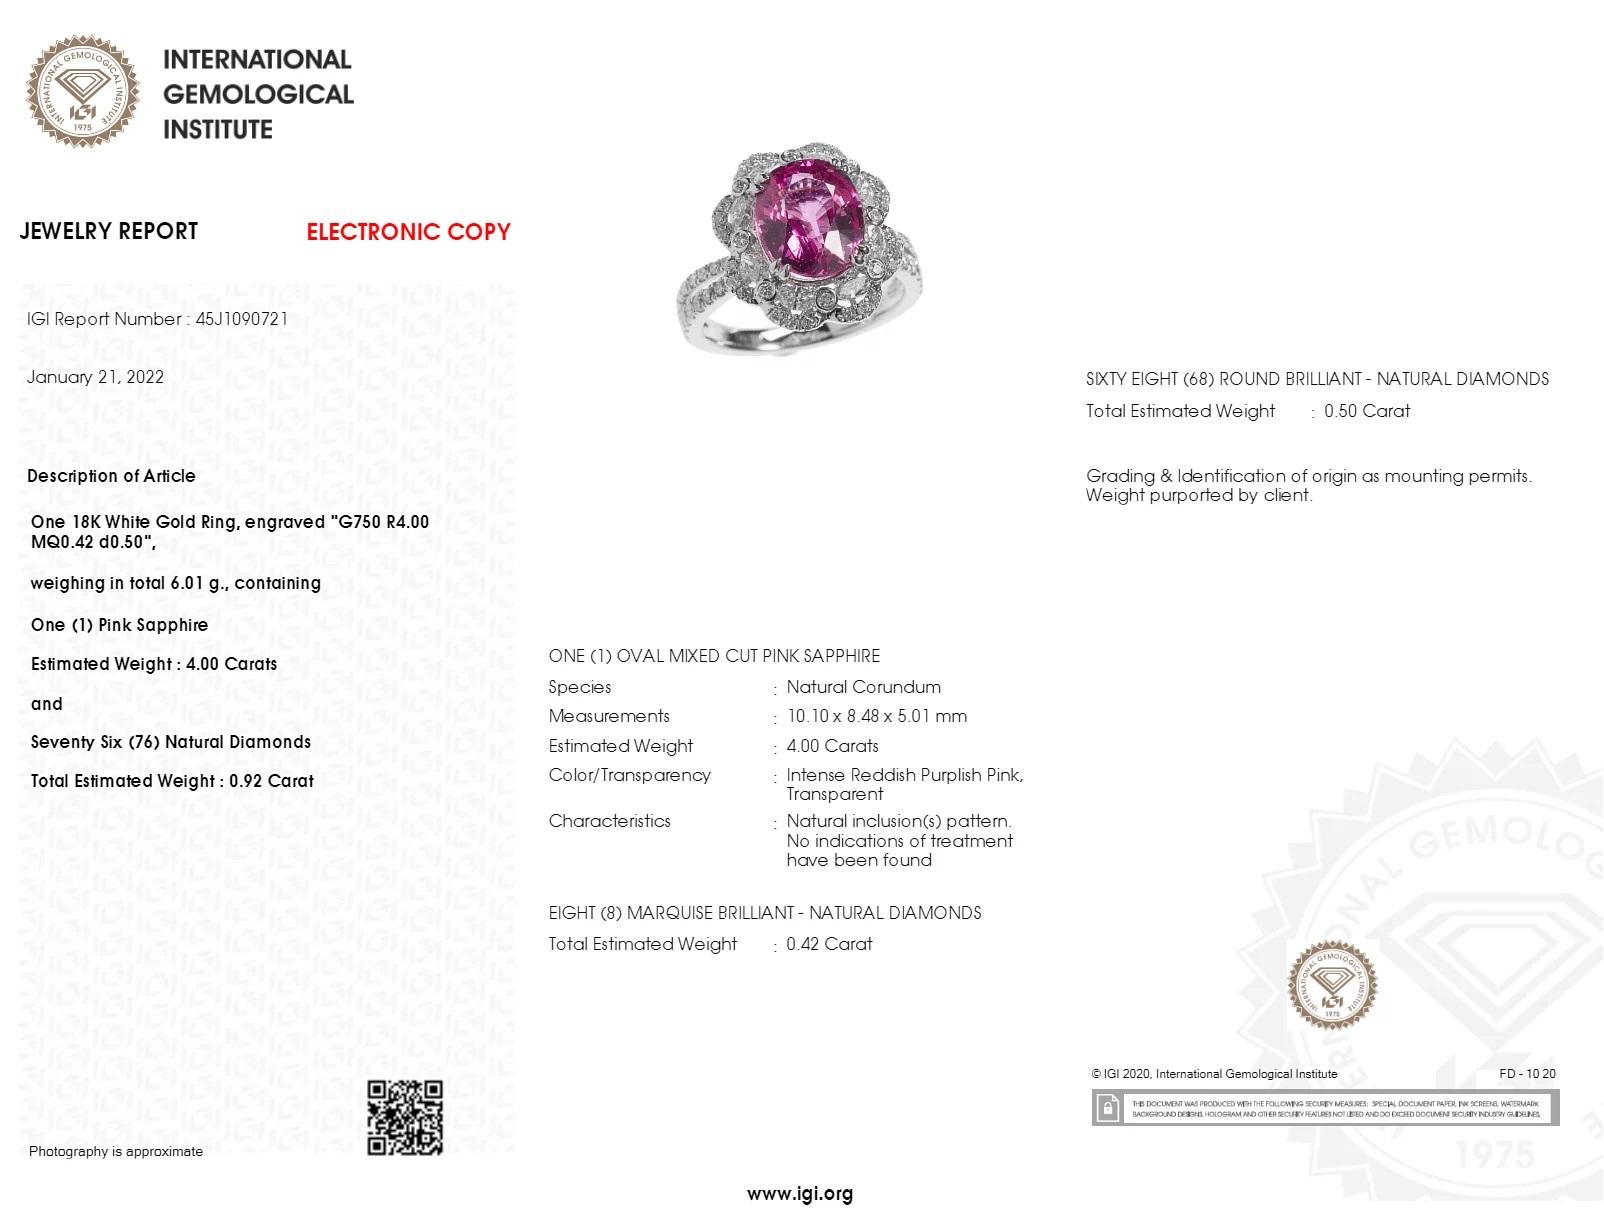 This unique, brilliant and exceptional cocktail ring features a spectacular unheated pink sapphire is designed by CADMUS in 18K white gold.
Accompanied by a IGI Report, this pink sapphire is certified unheated, which is an extremely rare find for